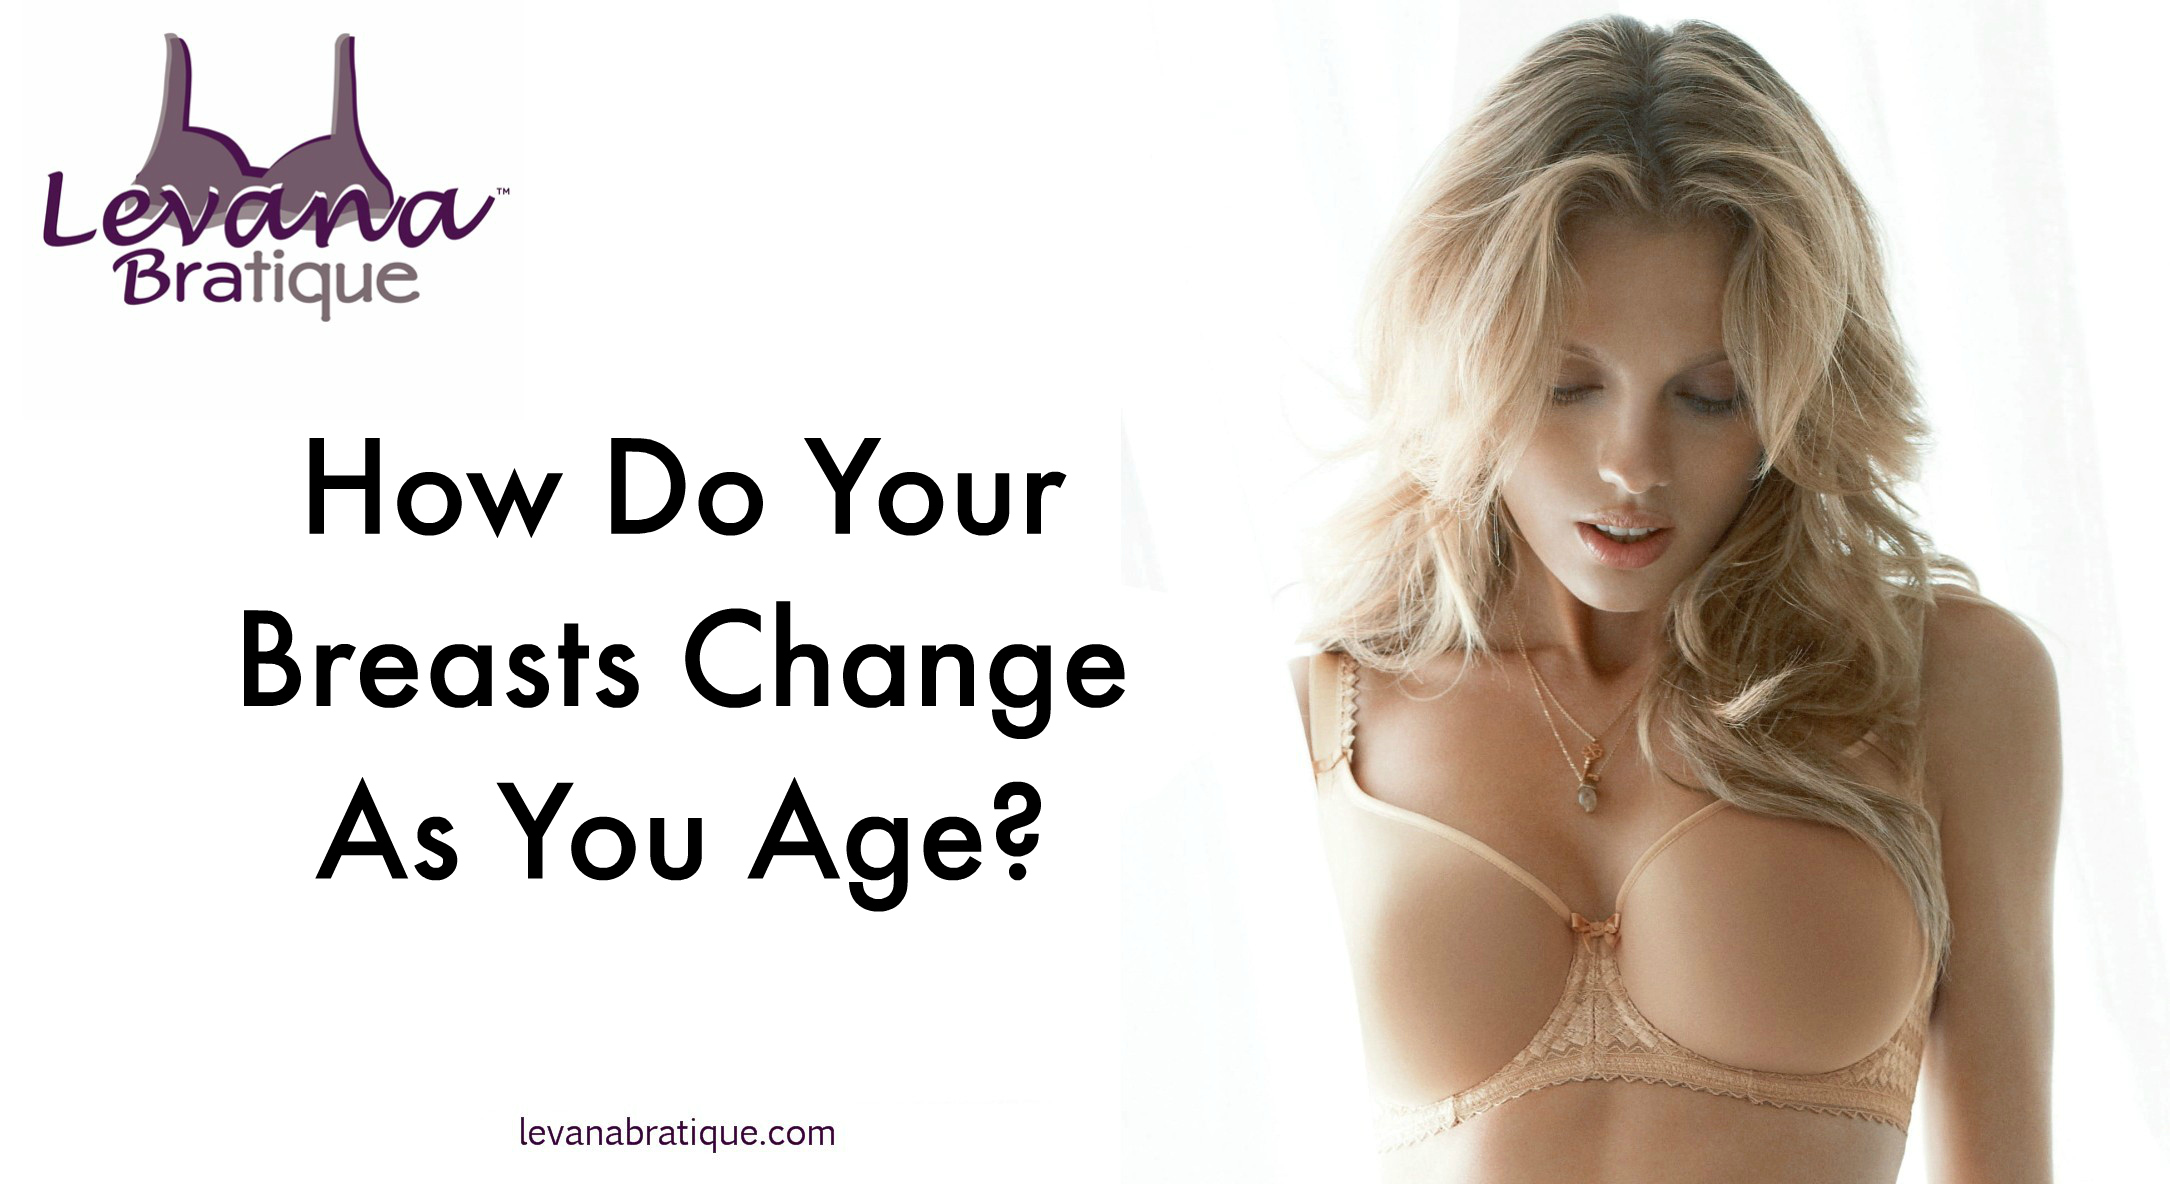 How Do Your Breasts Change with Age?, Levana Bratique